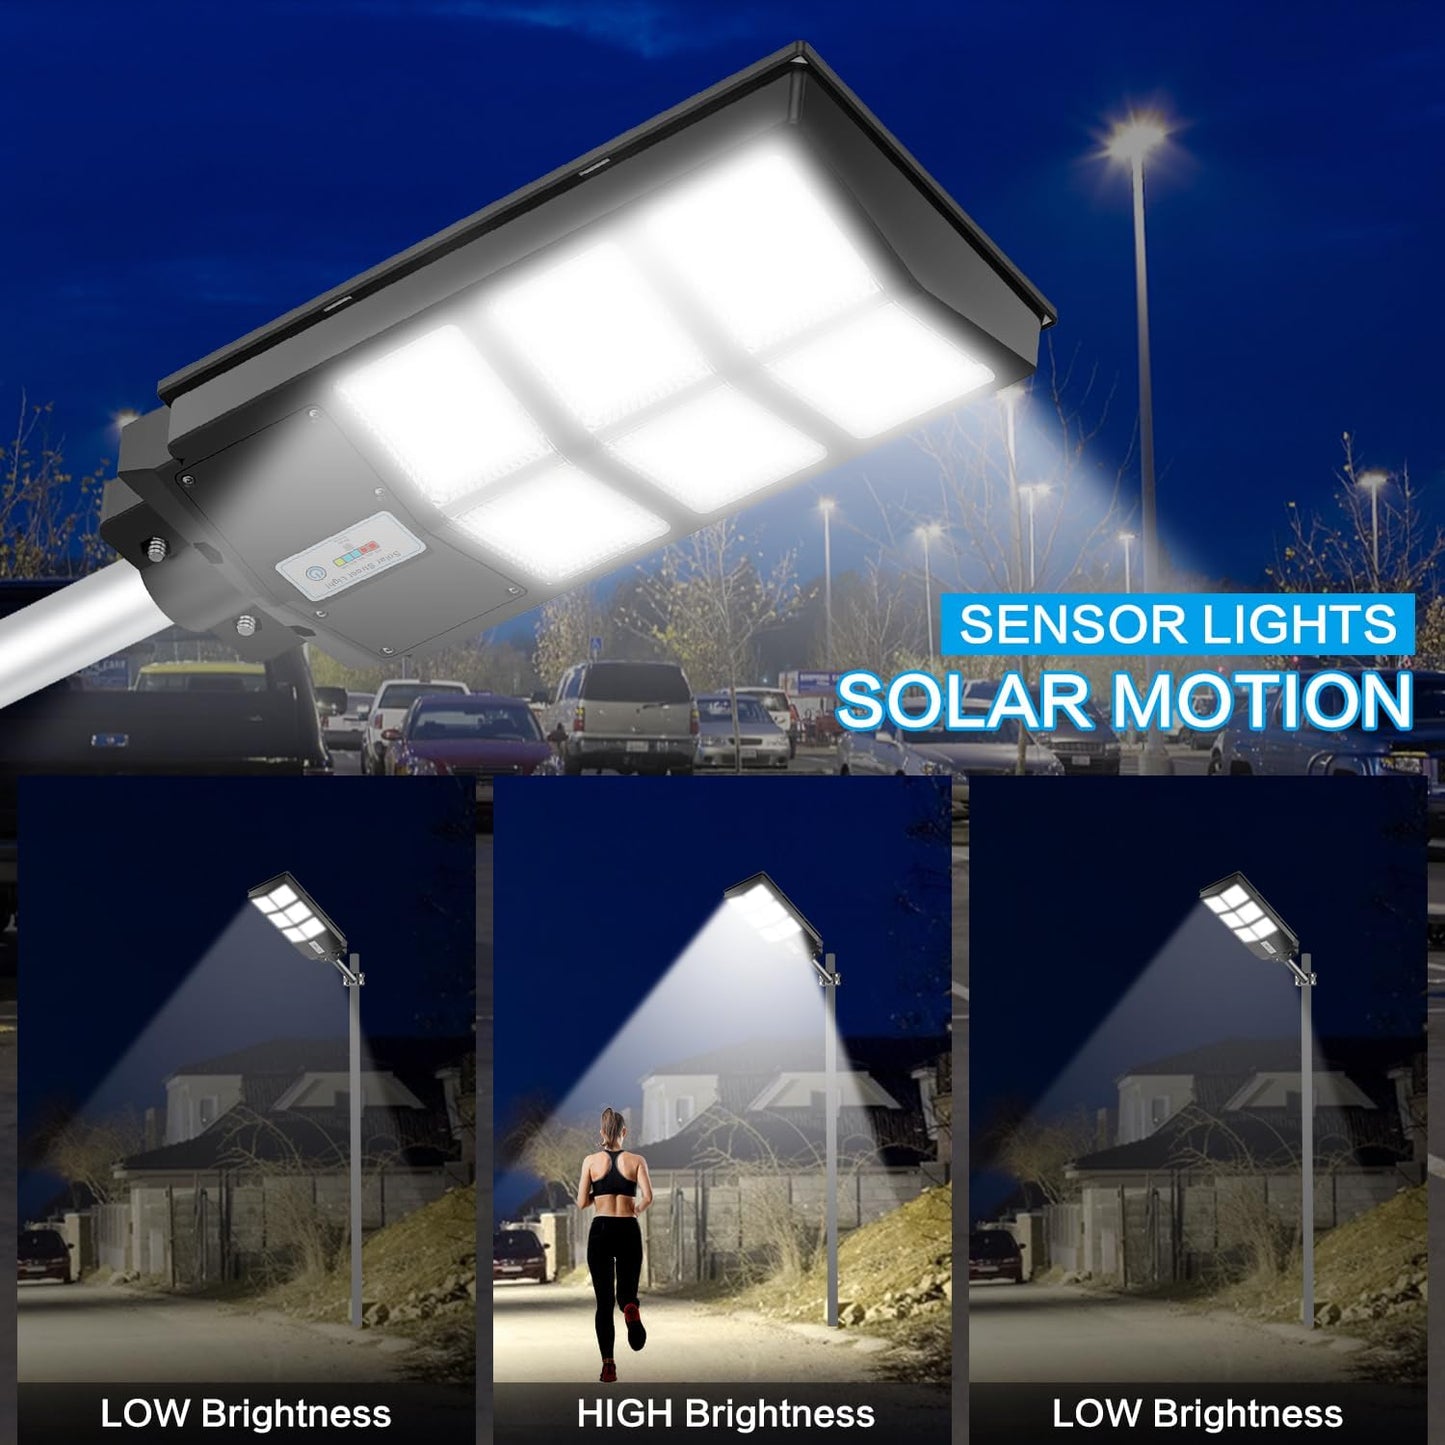 600W Solar Street Lights Outdoor Waterproof, 6500K 30000LM Outdoor LED Street Light Dusk to Dawn, LED Wide Angle Lamp with Motion Sensor and Remote Control, for Parking Lot, Yard, etc.